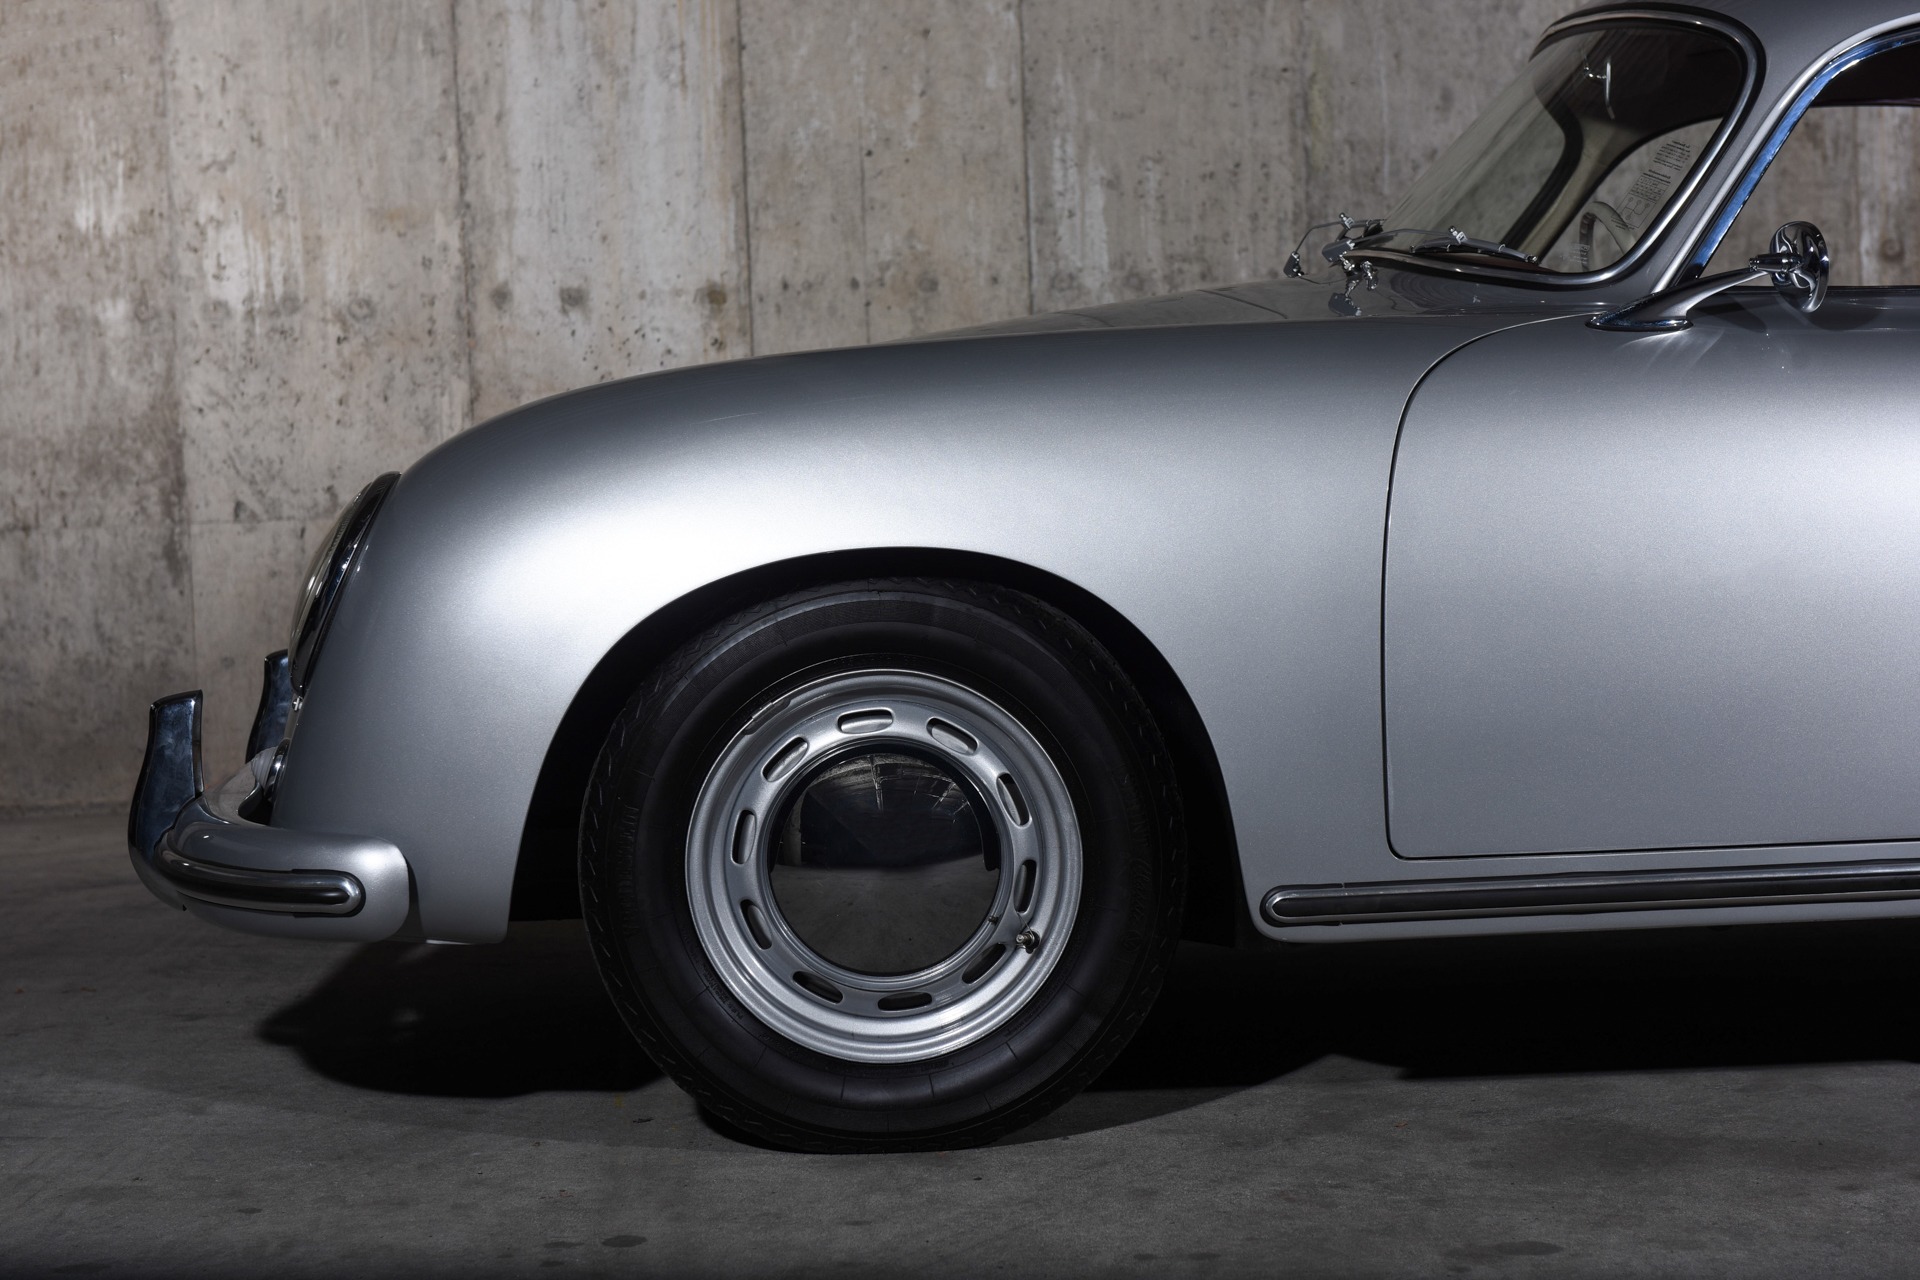 Used 1959 Porsche 356 Sunroof Coupe For Sale (Sold) | Ryan Friedman Motor  Cars LLC Stock #1004